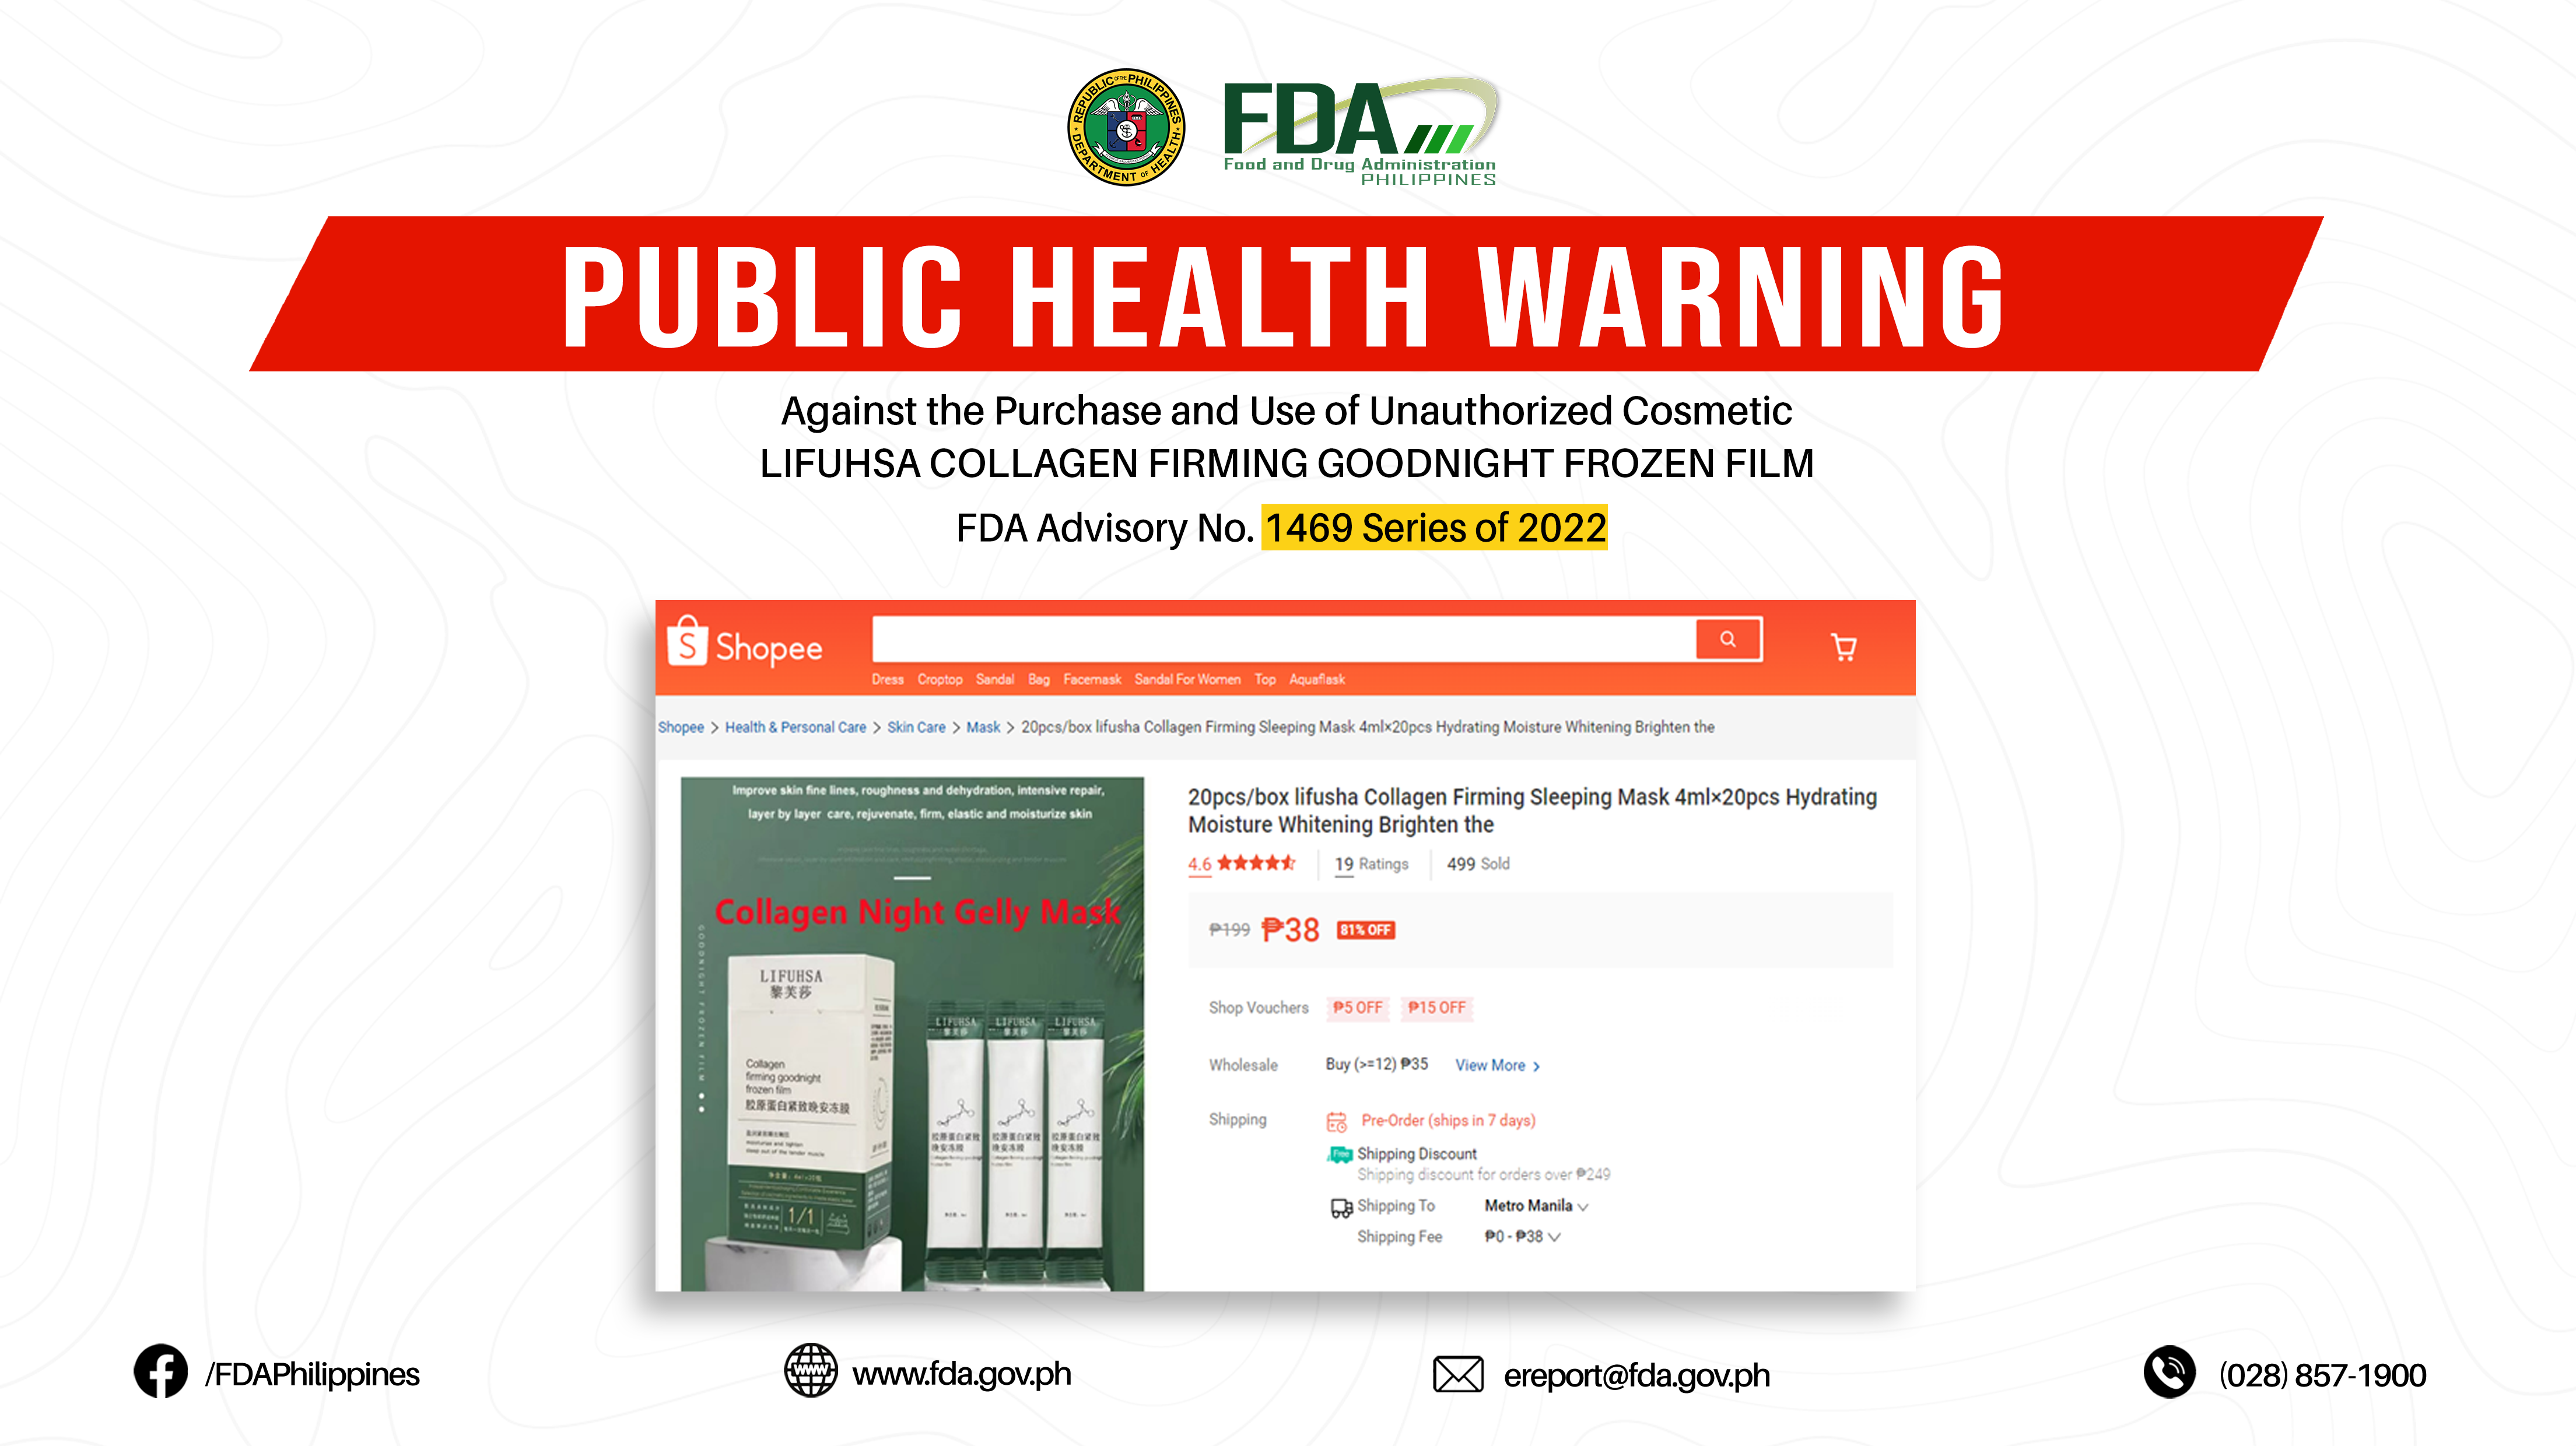 FDA Advisory No.2022-1469 || Public Health Warning Against the Purchase and Use of Unauthorized Cosmetic LIFUHSA COLLAGEN FIRMING GOODNIGHT FROZEN FILM